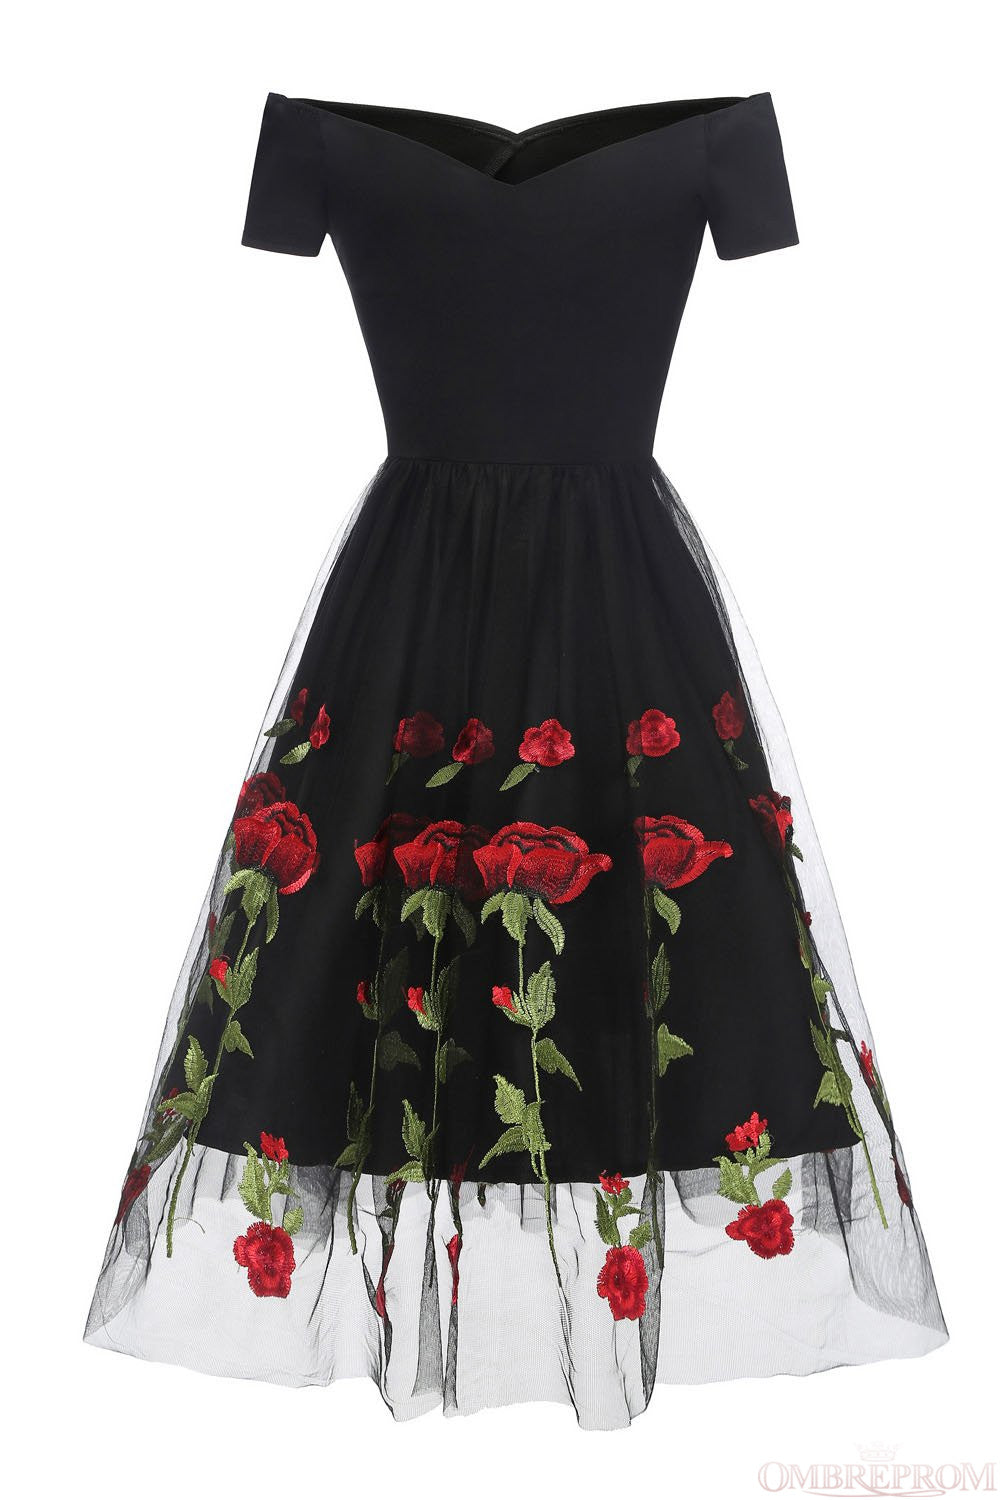 Classic Black Off the Shoulder Lace Embroidery Floral Party Dresses